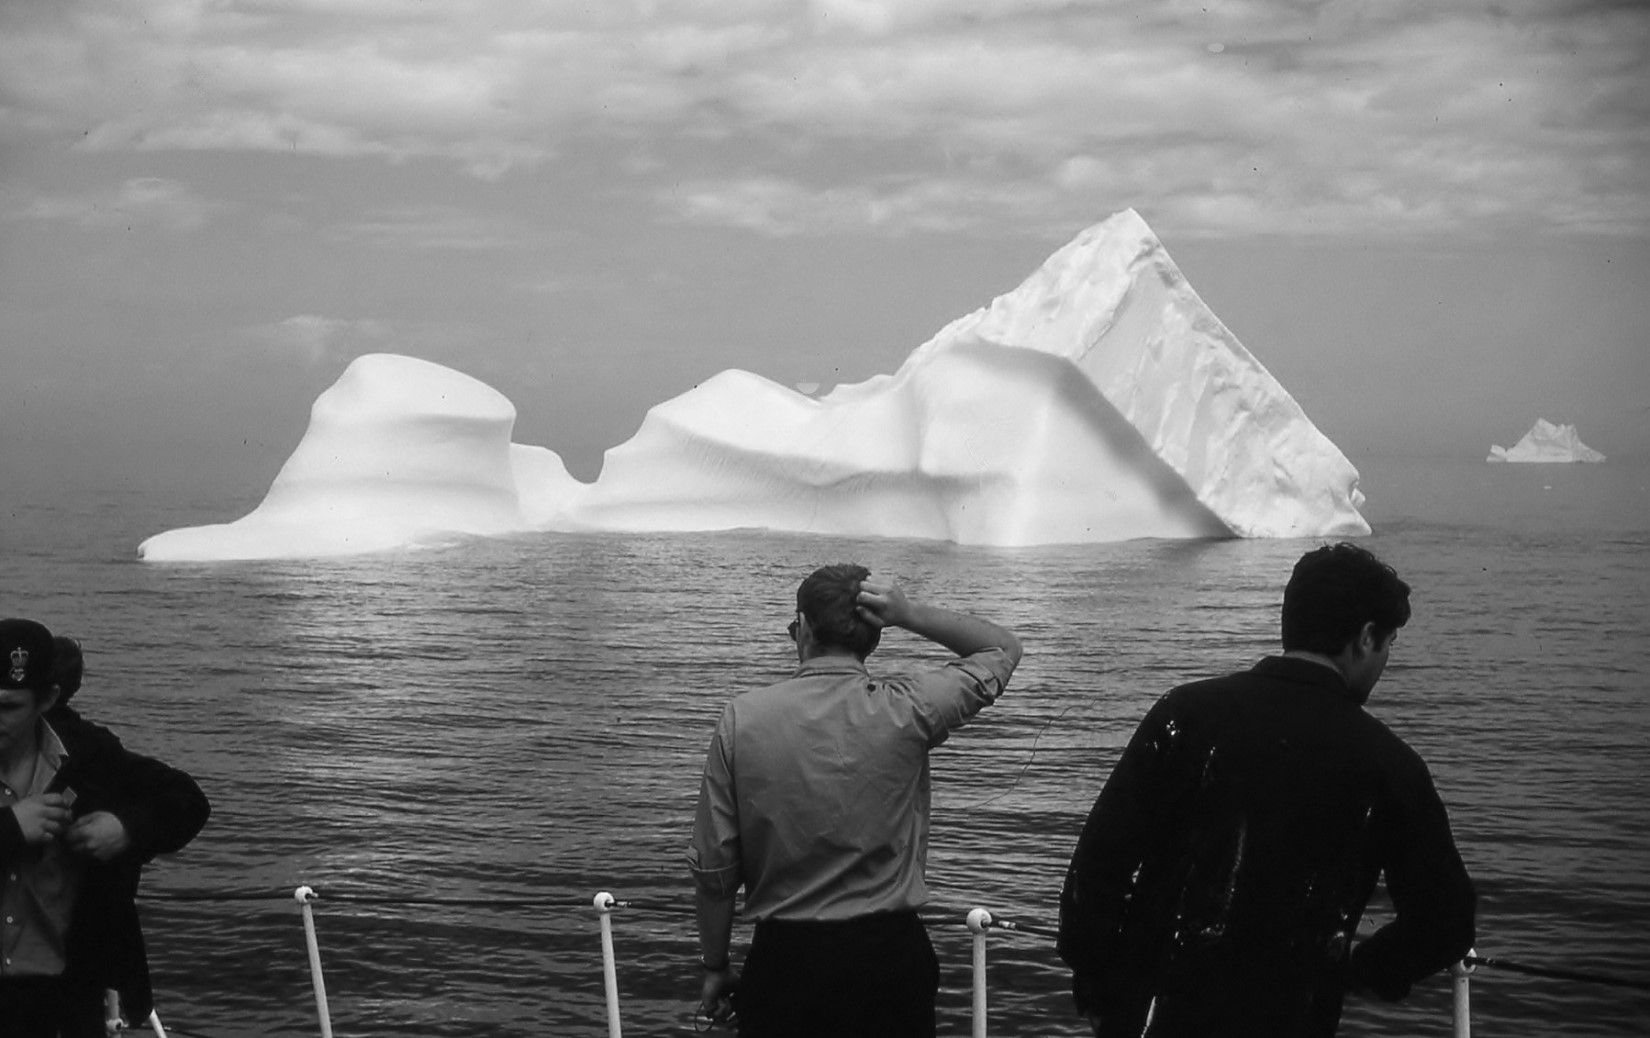 Photo of icebergs taken from the Porte St. Jean.